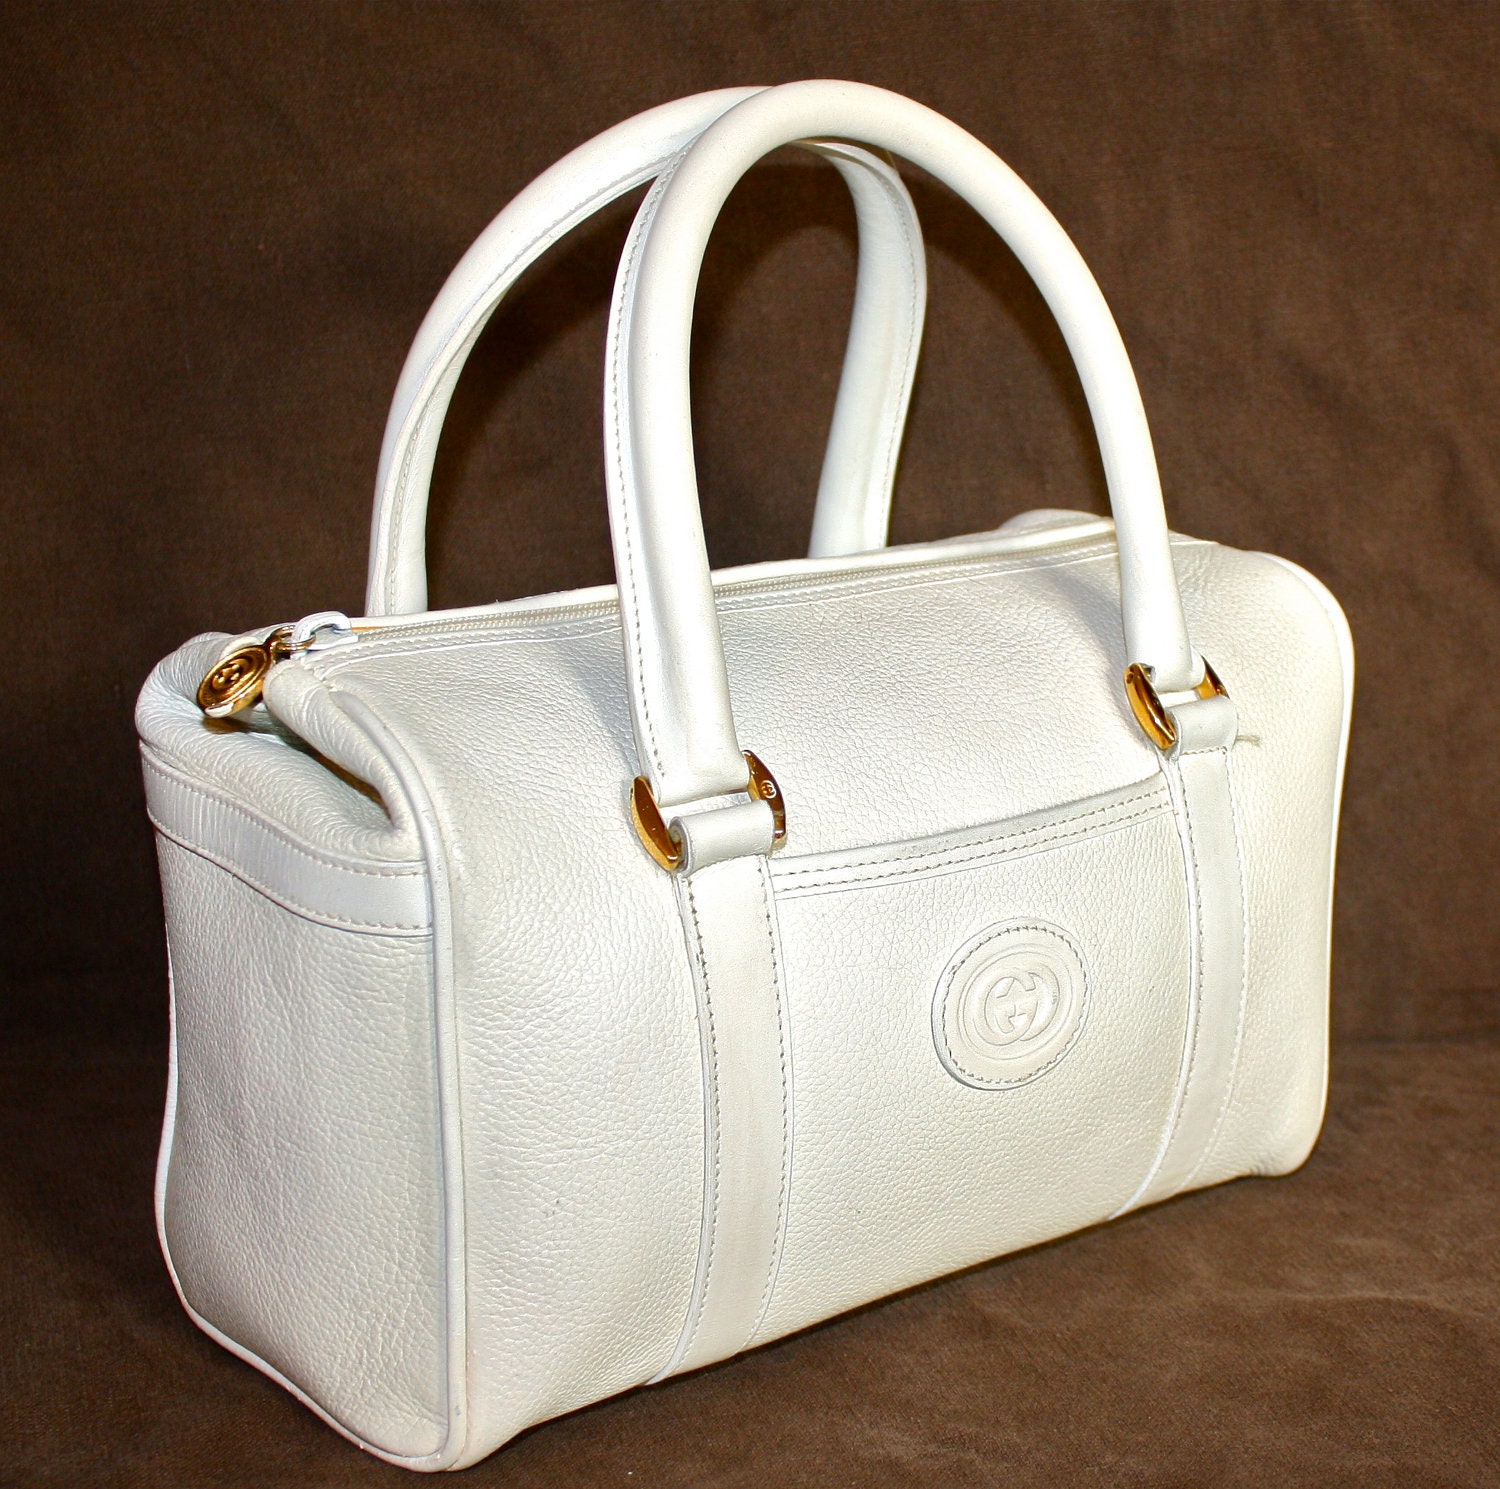 Vintage GUCCI Speedy Tote White Pebbled Leather by StatedStyle